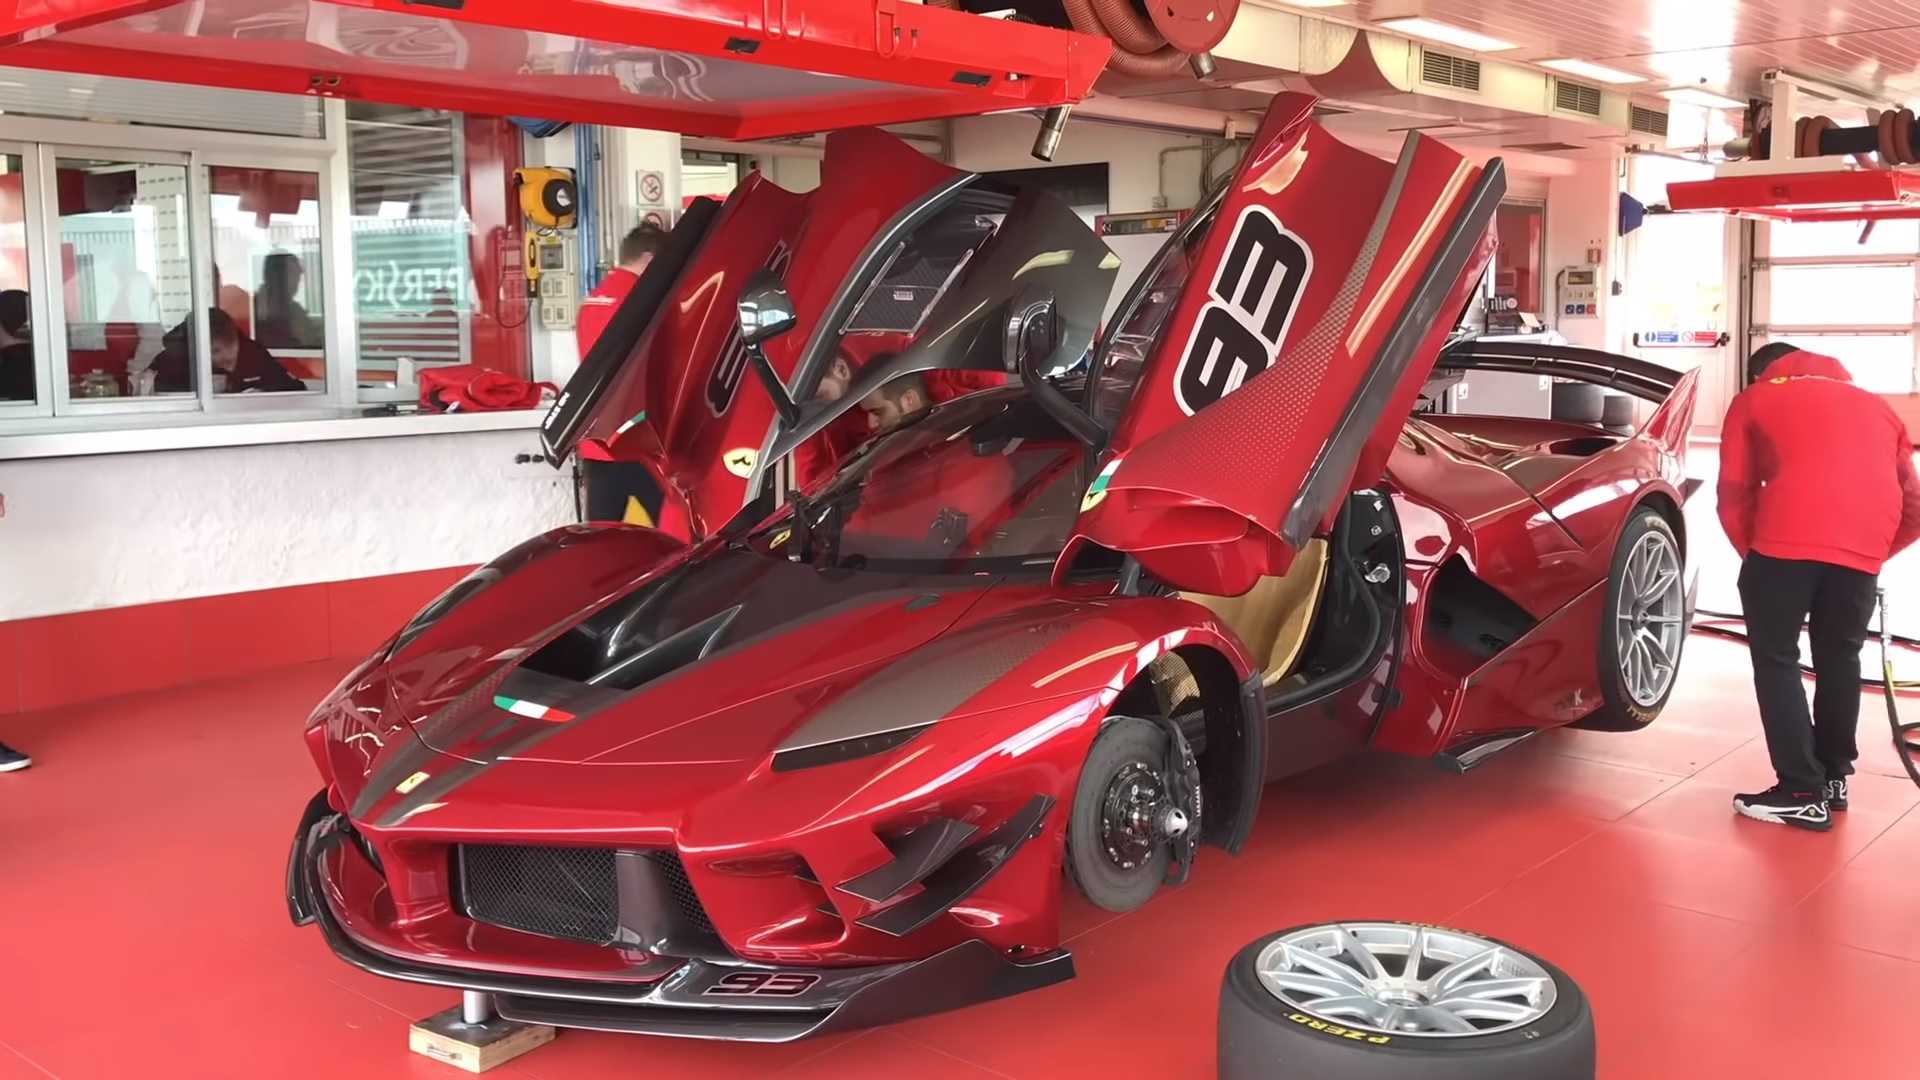 Ferrari fxx k evo: costs, facts, and figures